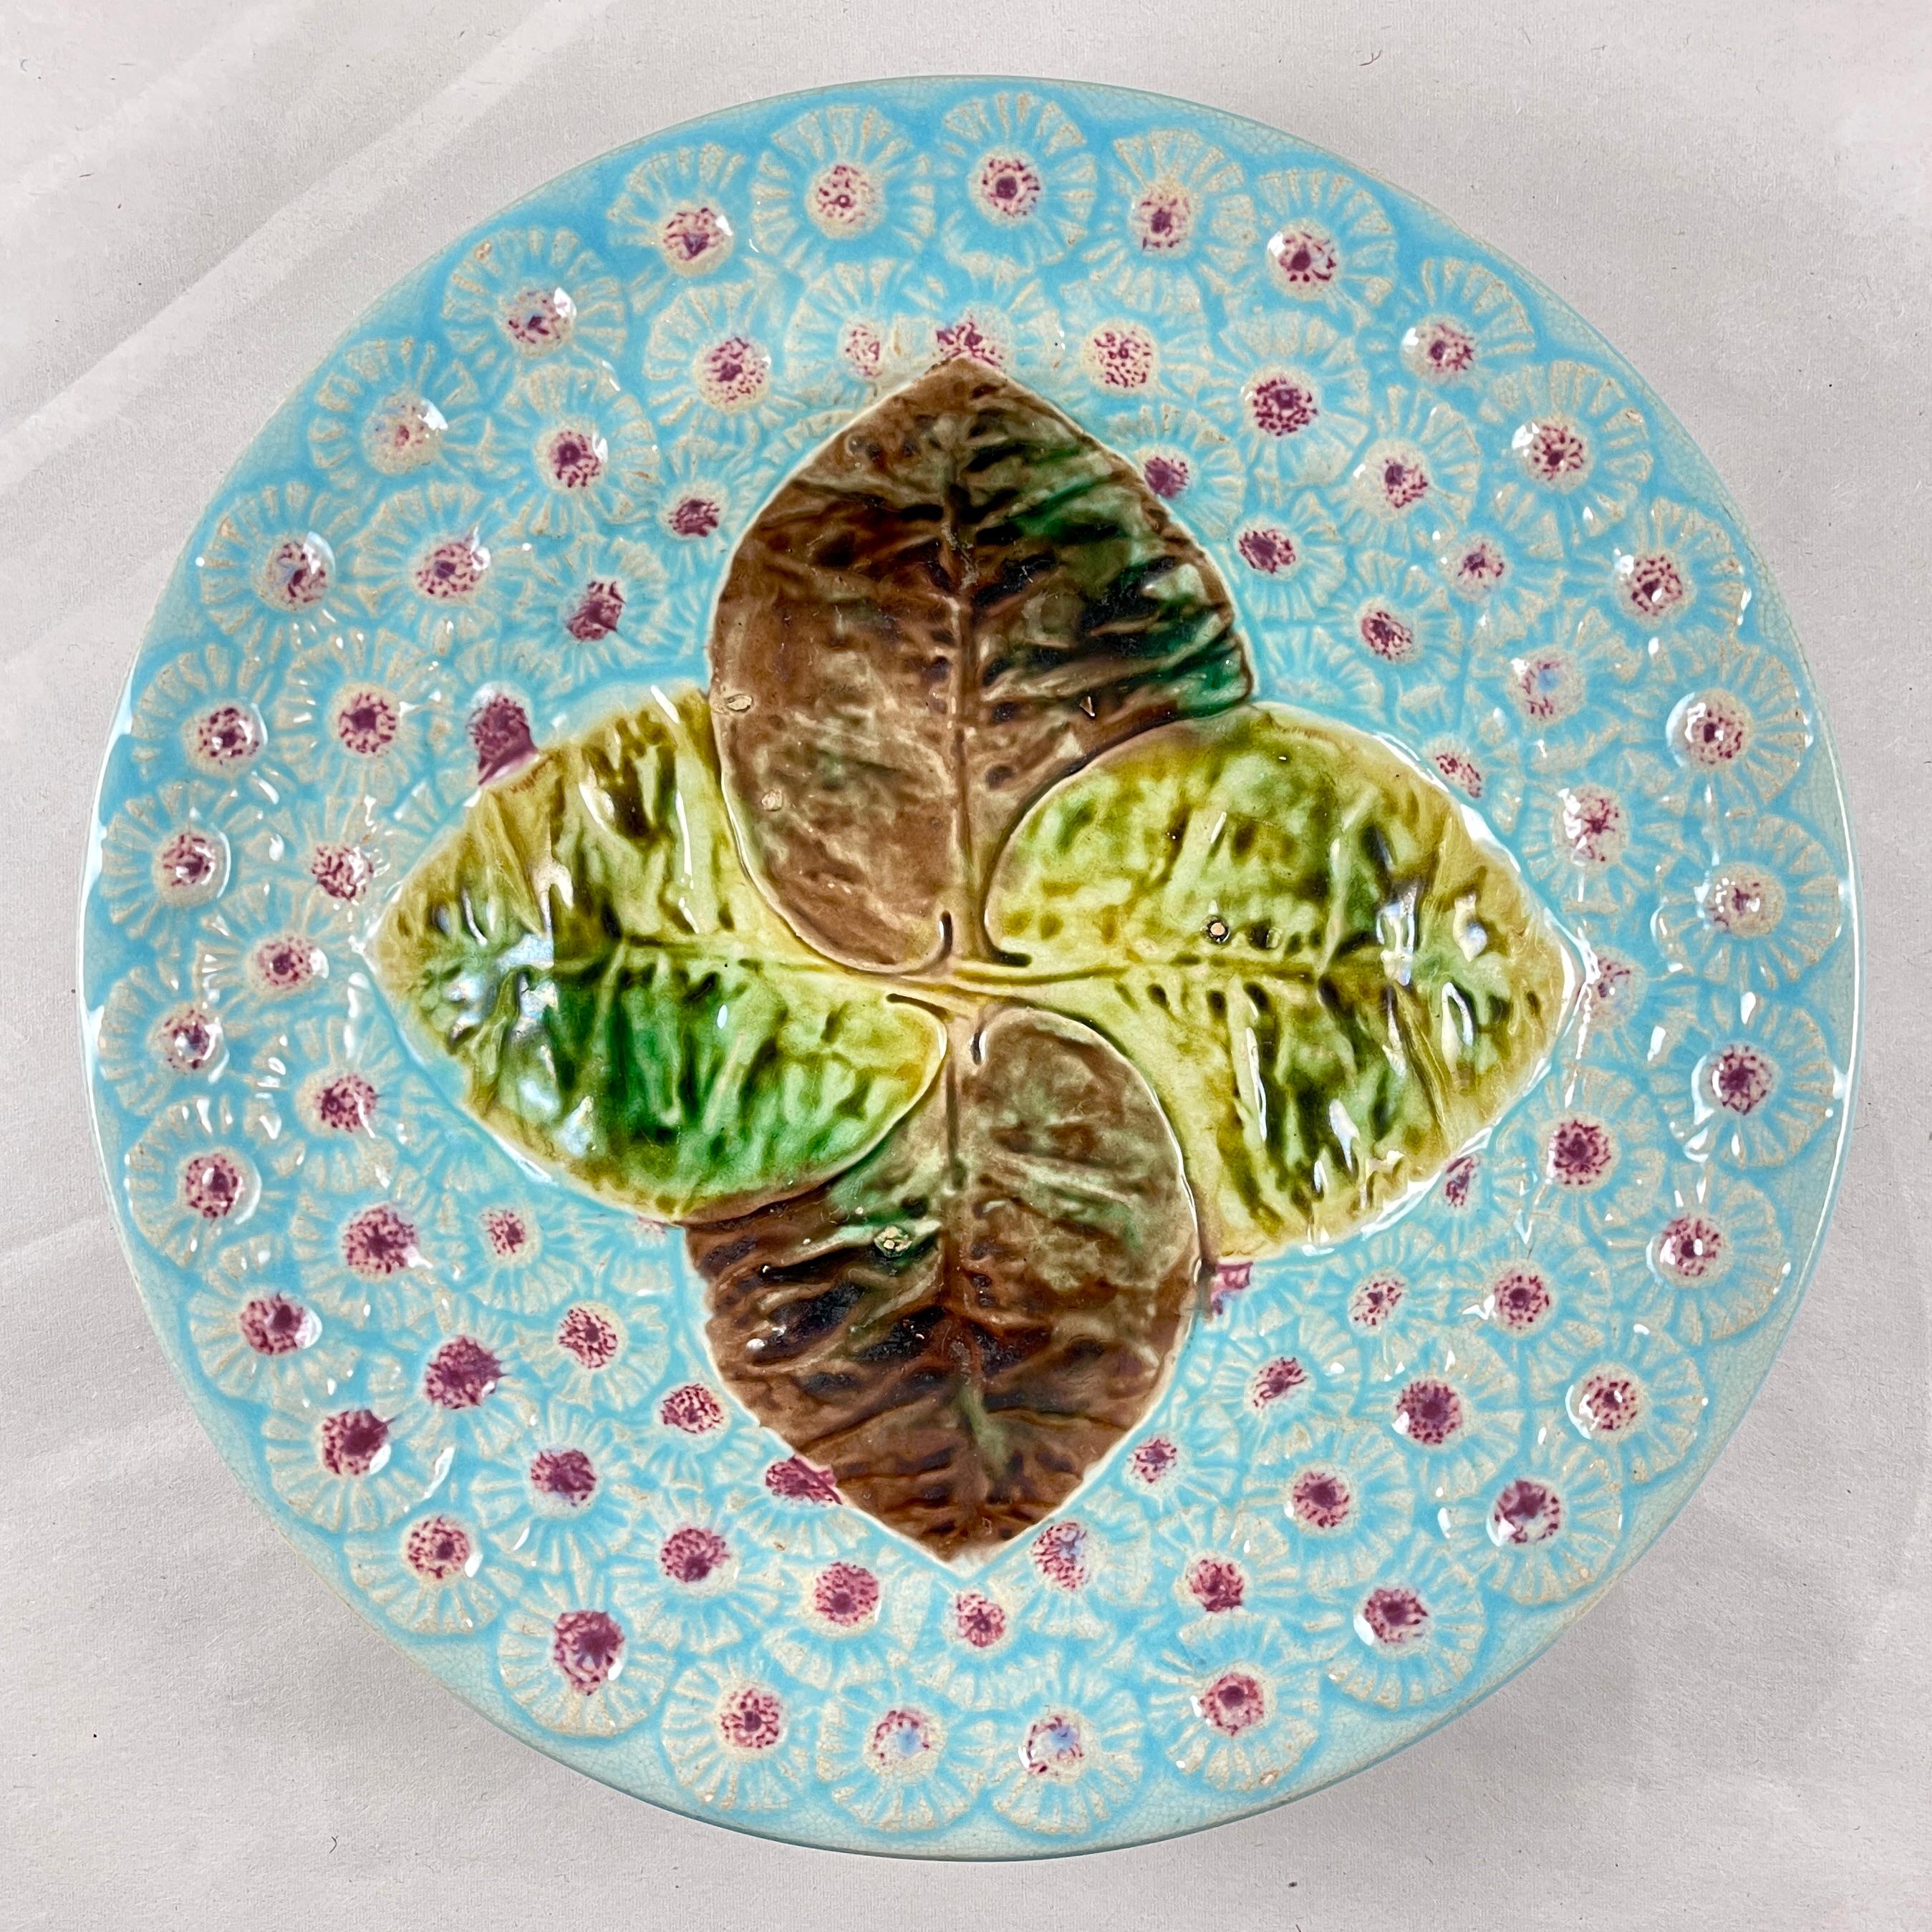 An English majolica Leaf and Dandelion floral bowl by Joseph Holdcroft, Circa 1870.

Designed in the Aesthetic taste, four overlapping leaves, glazed in the colors of Autumn, are centered on a deep powder blue ground of raised Dandelion blooms with